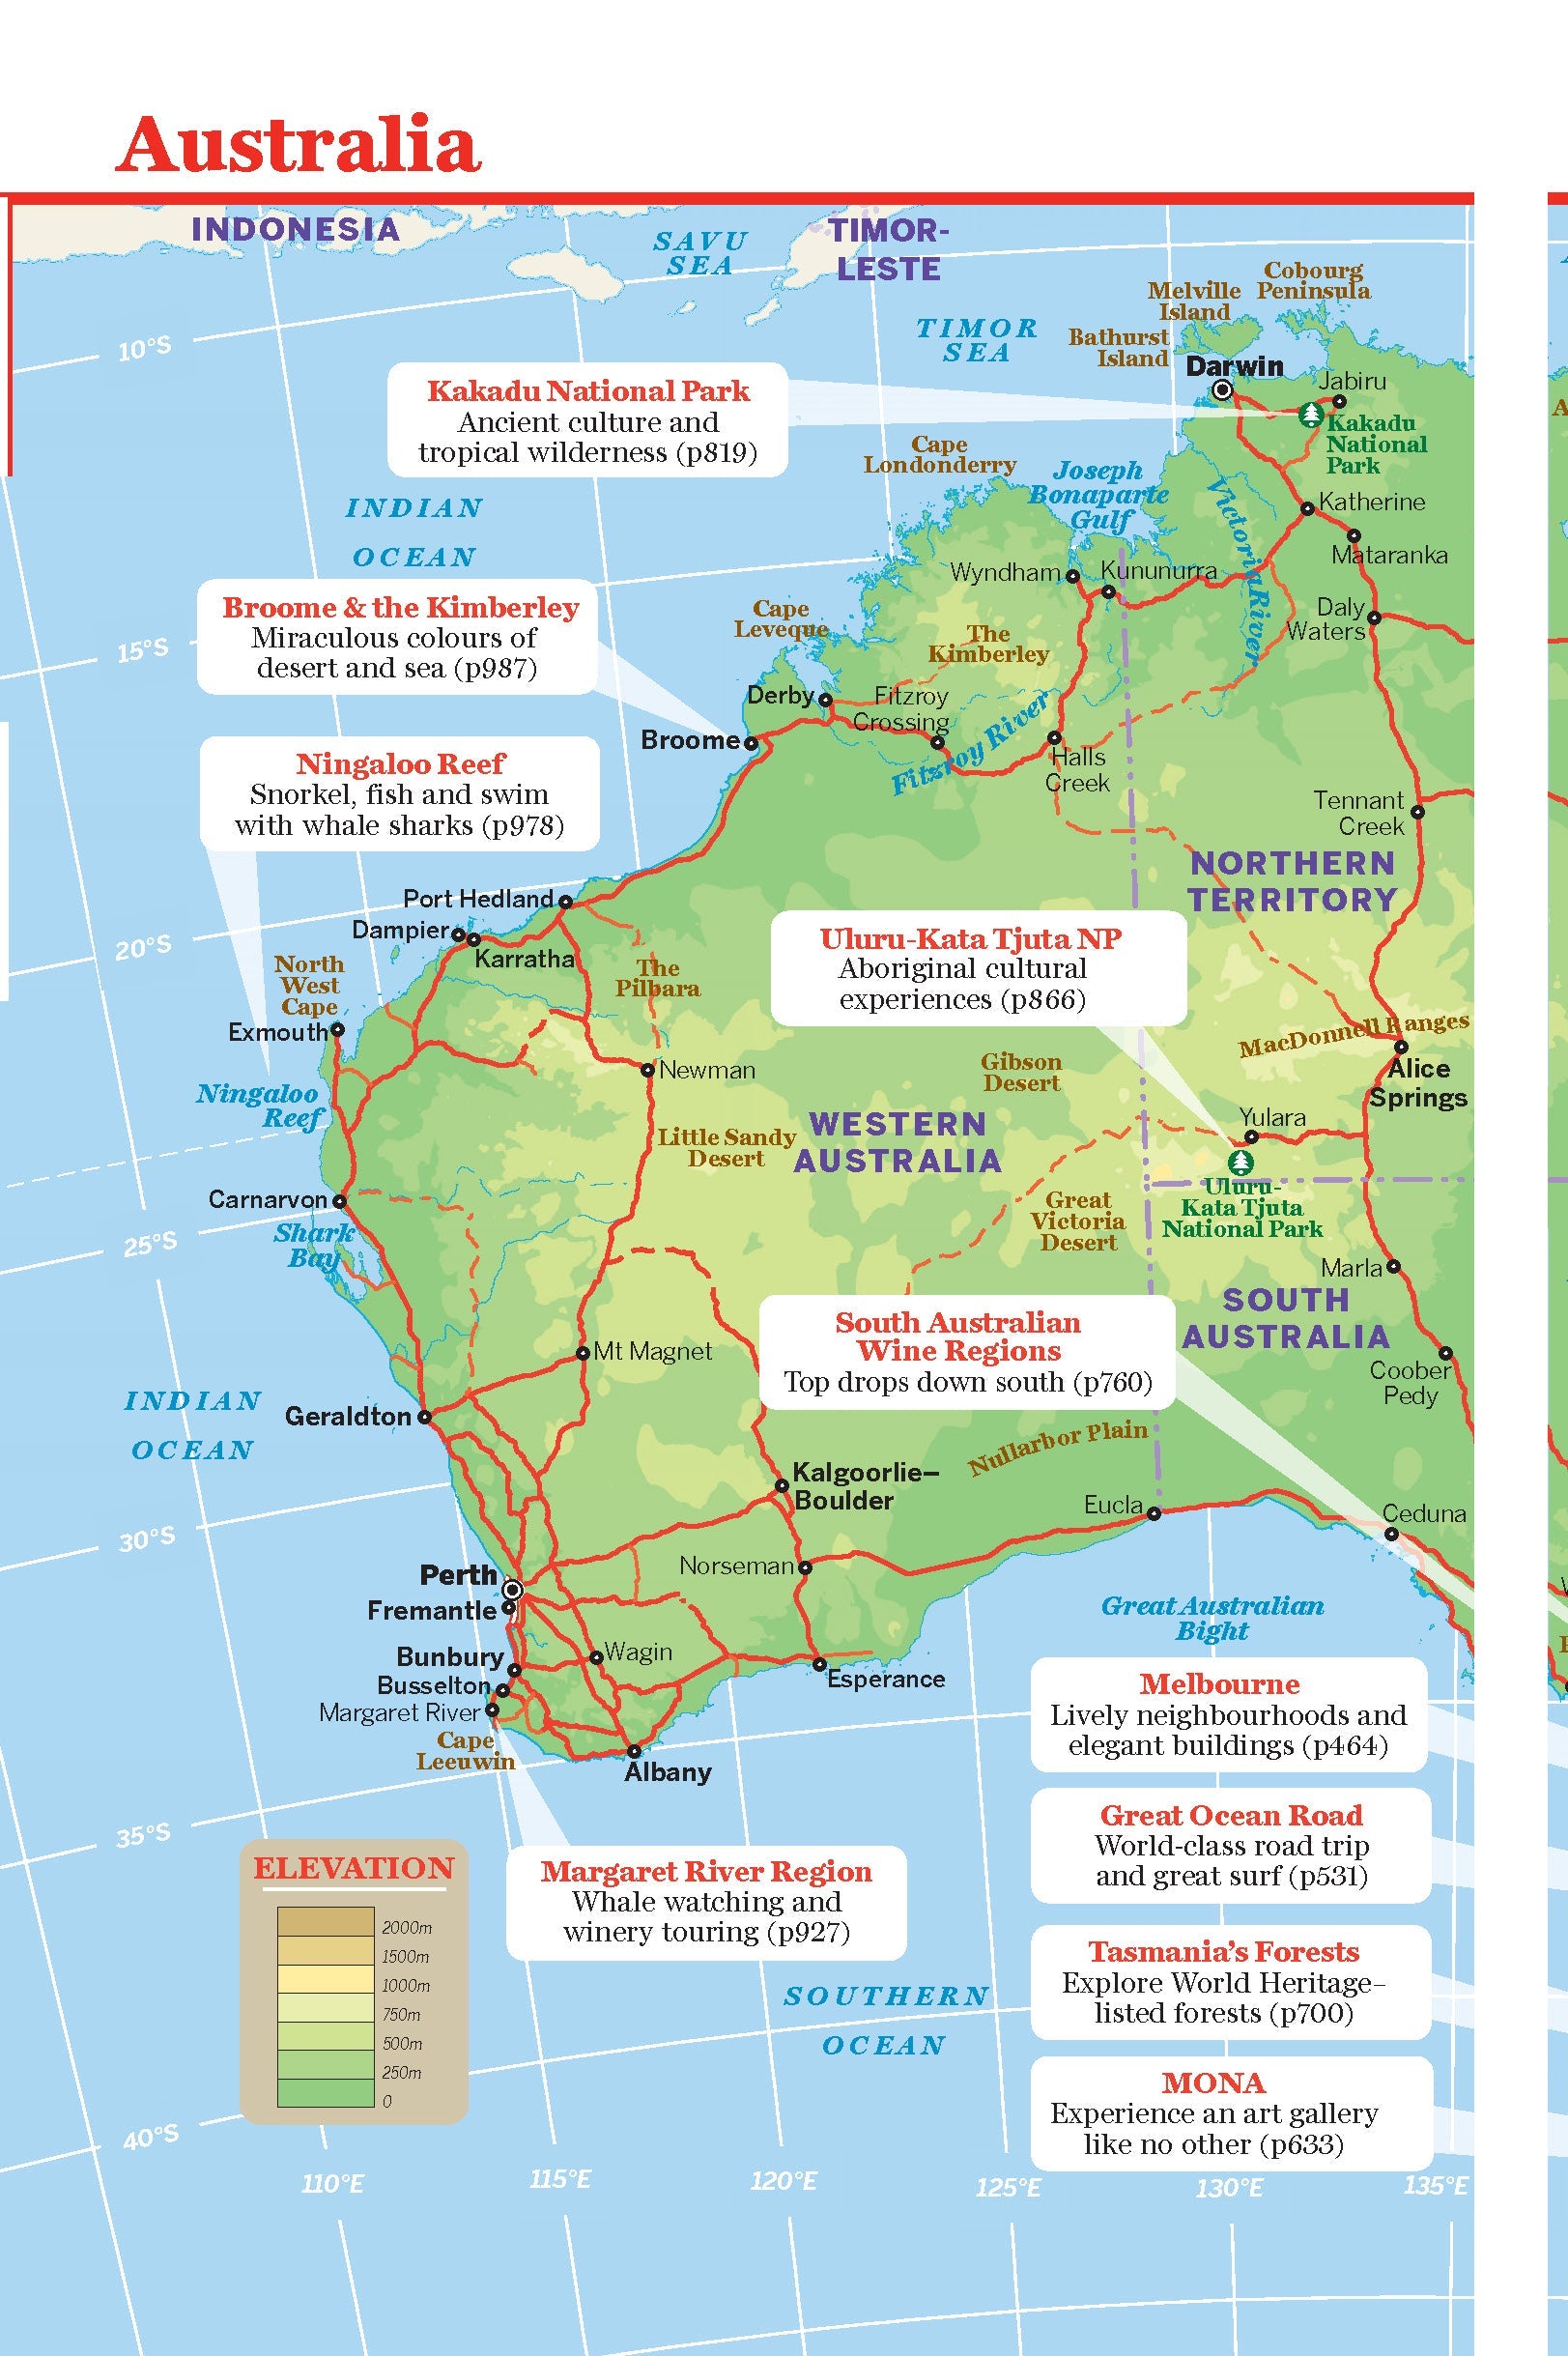  Lonely Planet Australia: Perfect for exploring top